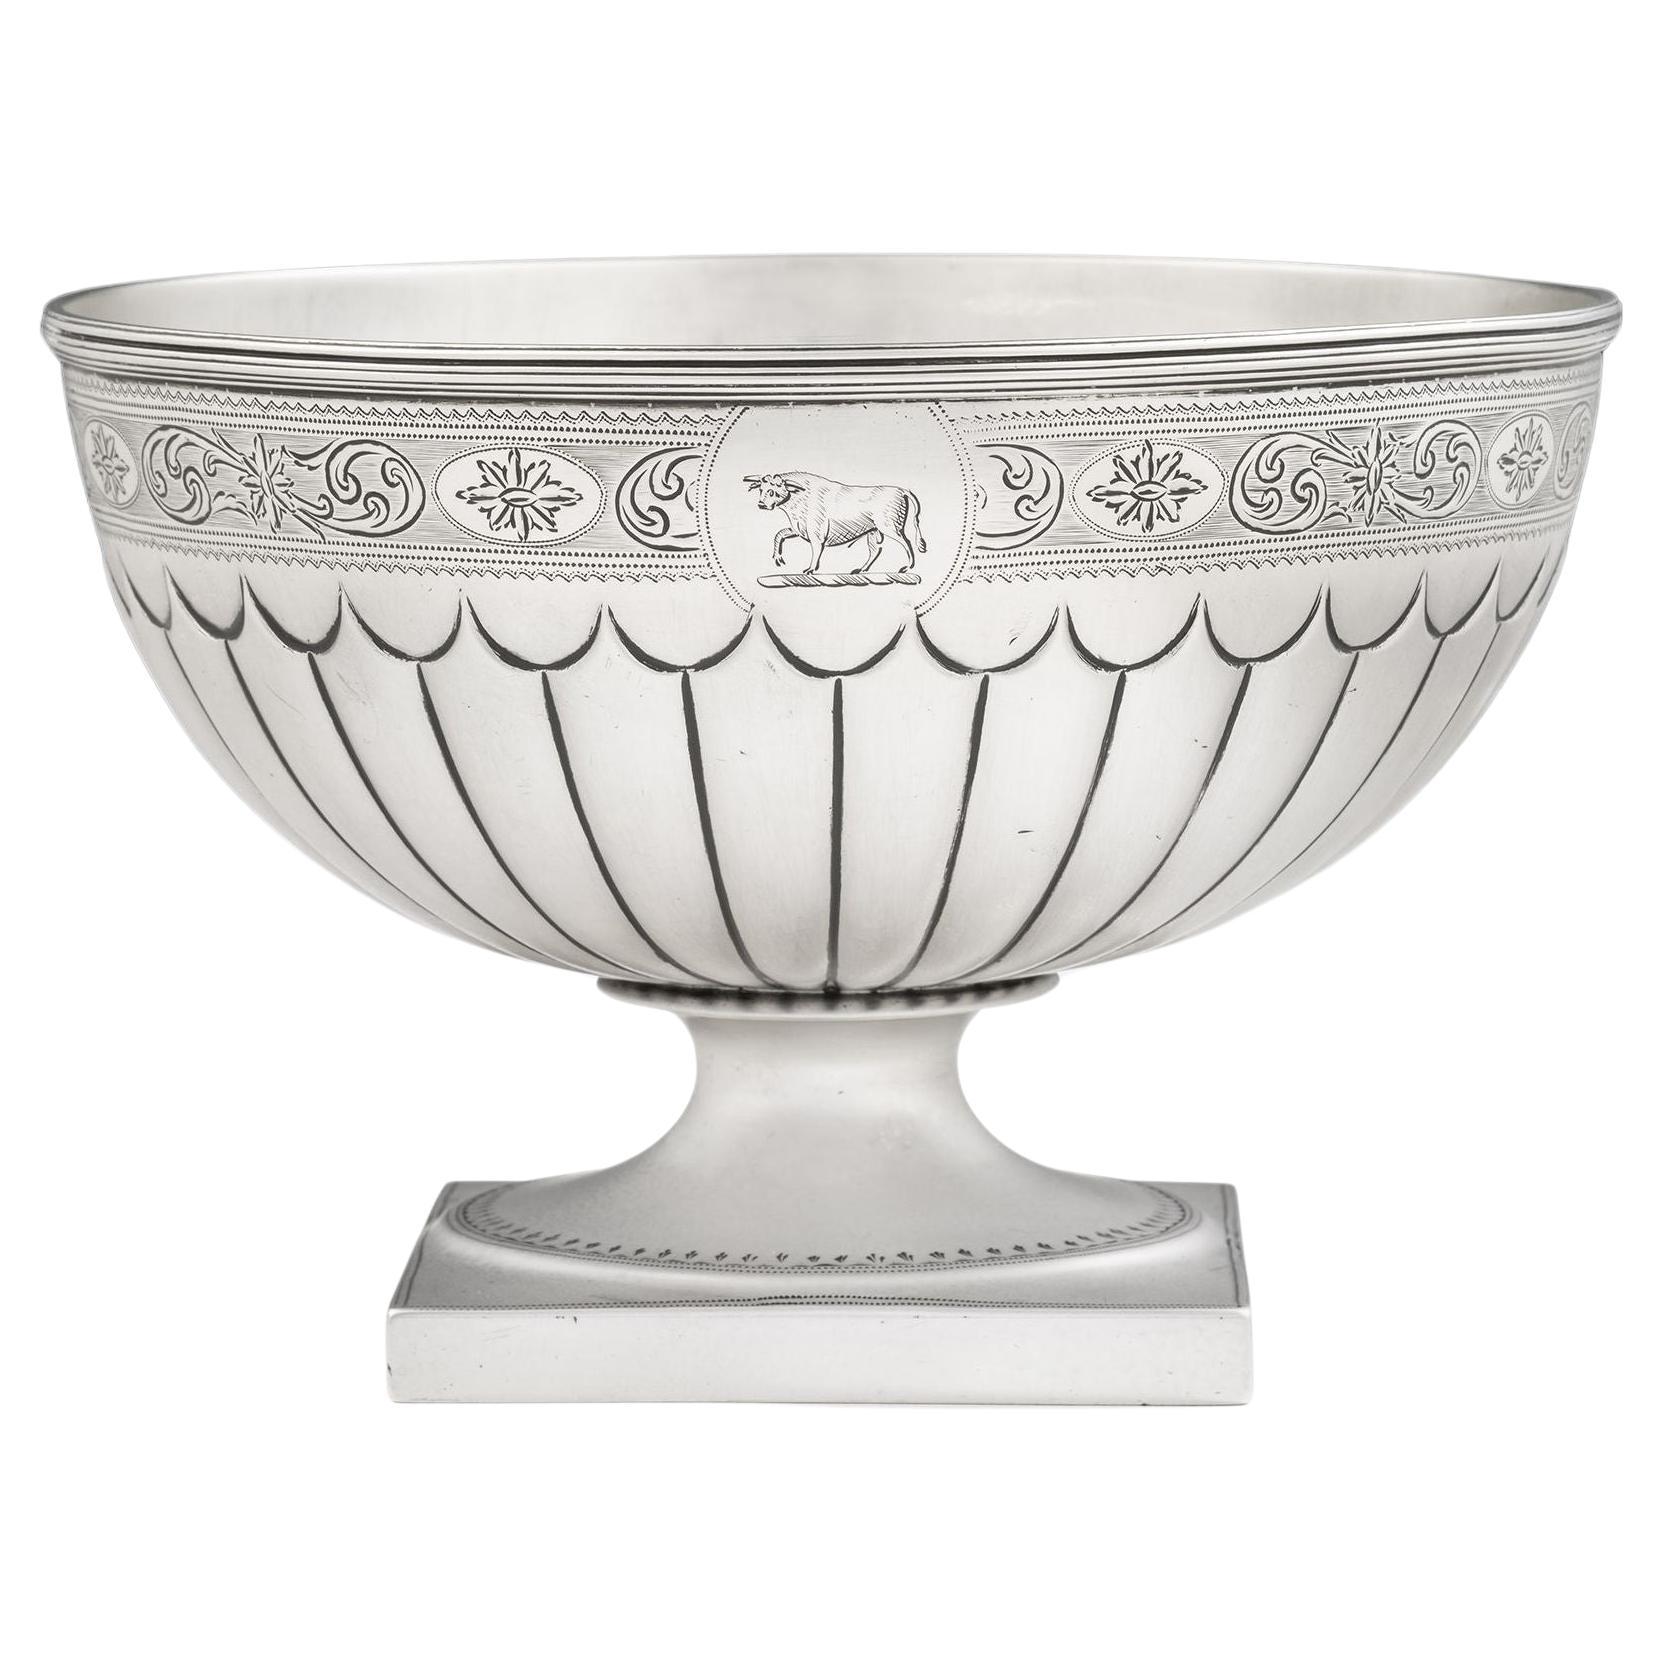  George III Bat Wing Fluted Table Bowl by Peter Podio, London, 1790 For Sale